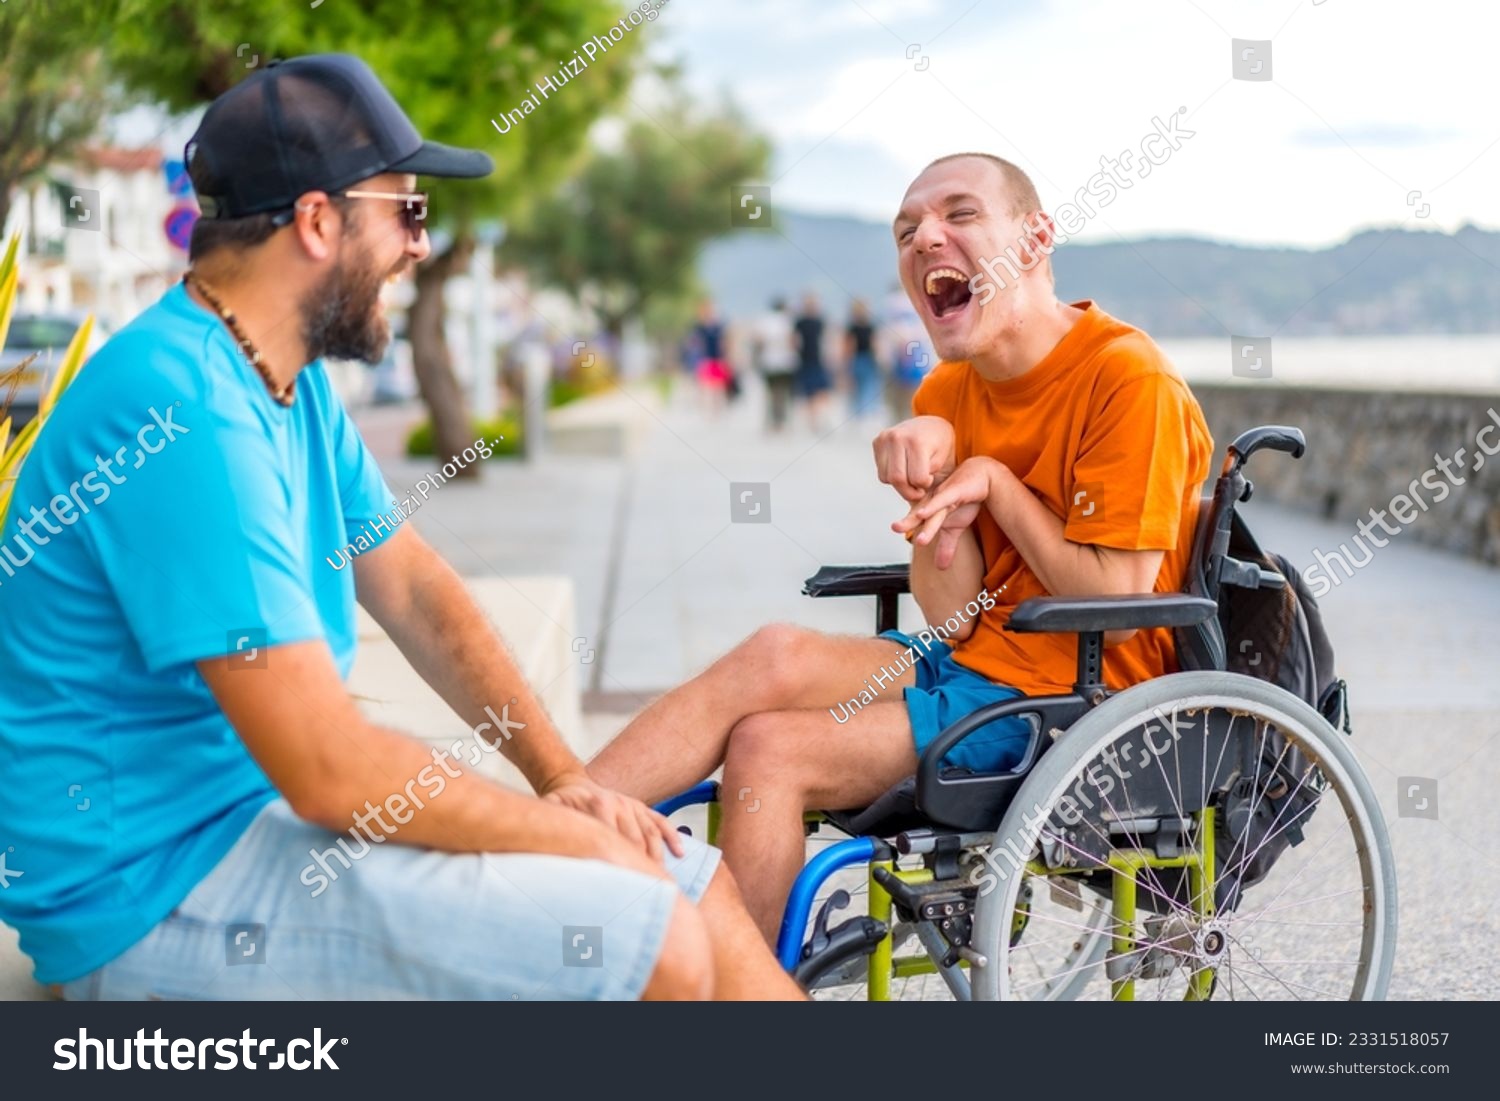 A disabled person in a wheelchair with a friend on summer vacation having fun laughing a lot #2331518057